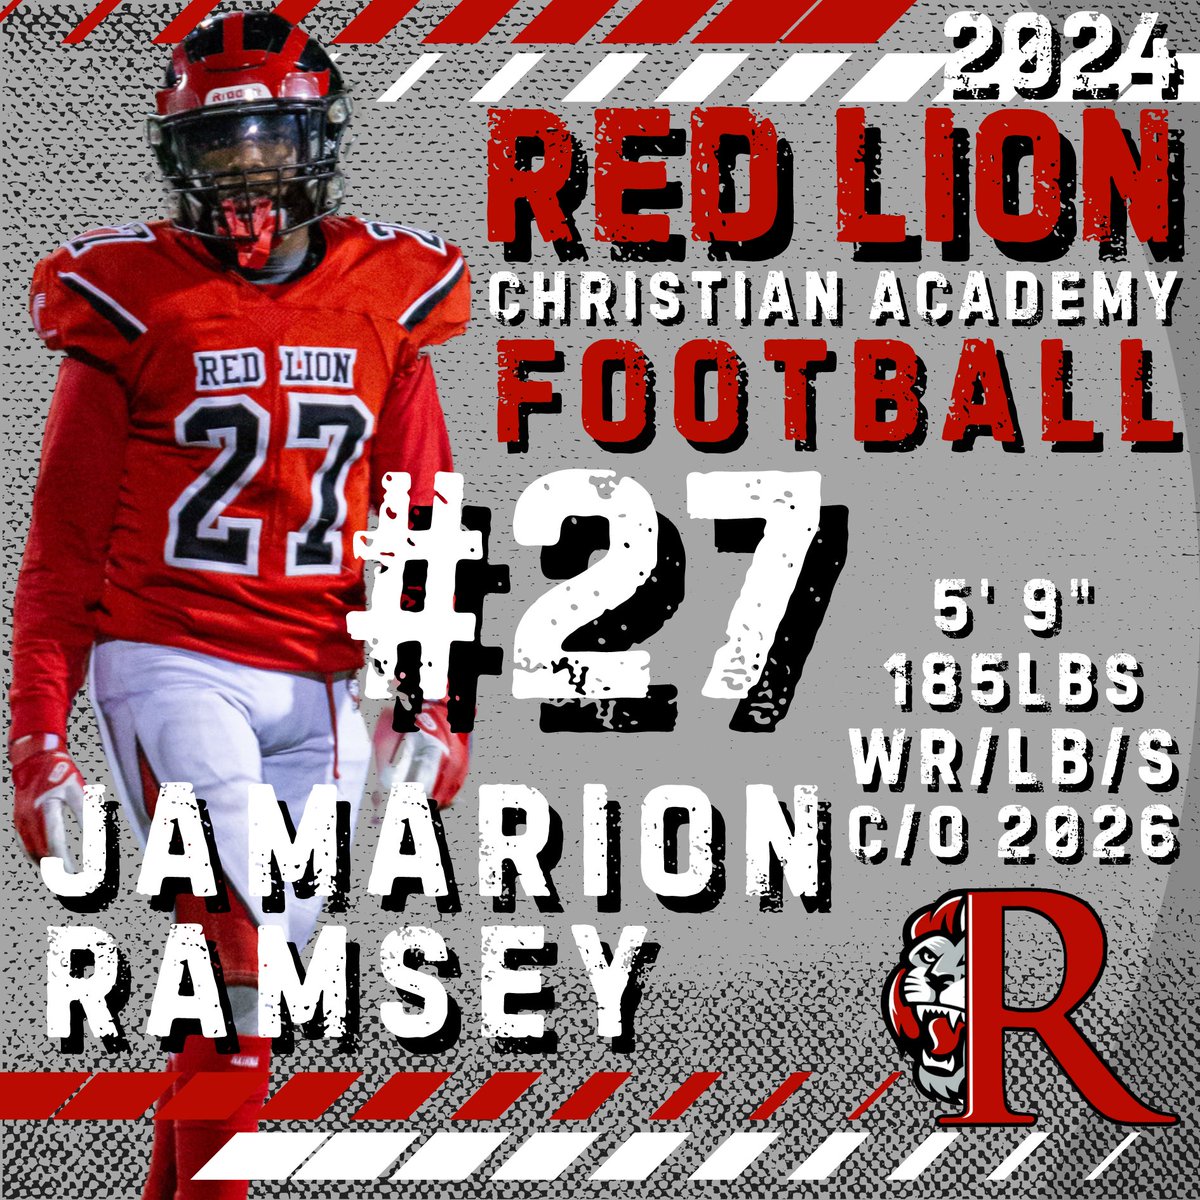 Class of 2026, Jamarion Ramsey. @thatboy_mar302 is a natural athlete who can play anywhere on the field. He finished his sophomore season with 88 tackles, w/ 40 solo. Jamarion is a rising junior who always works hard on the field and in class, receiving high honors last mp.…